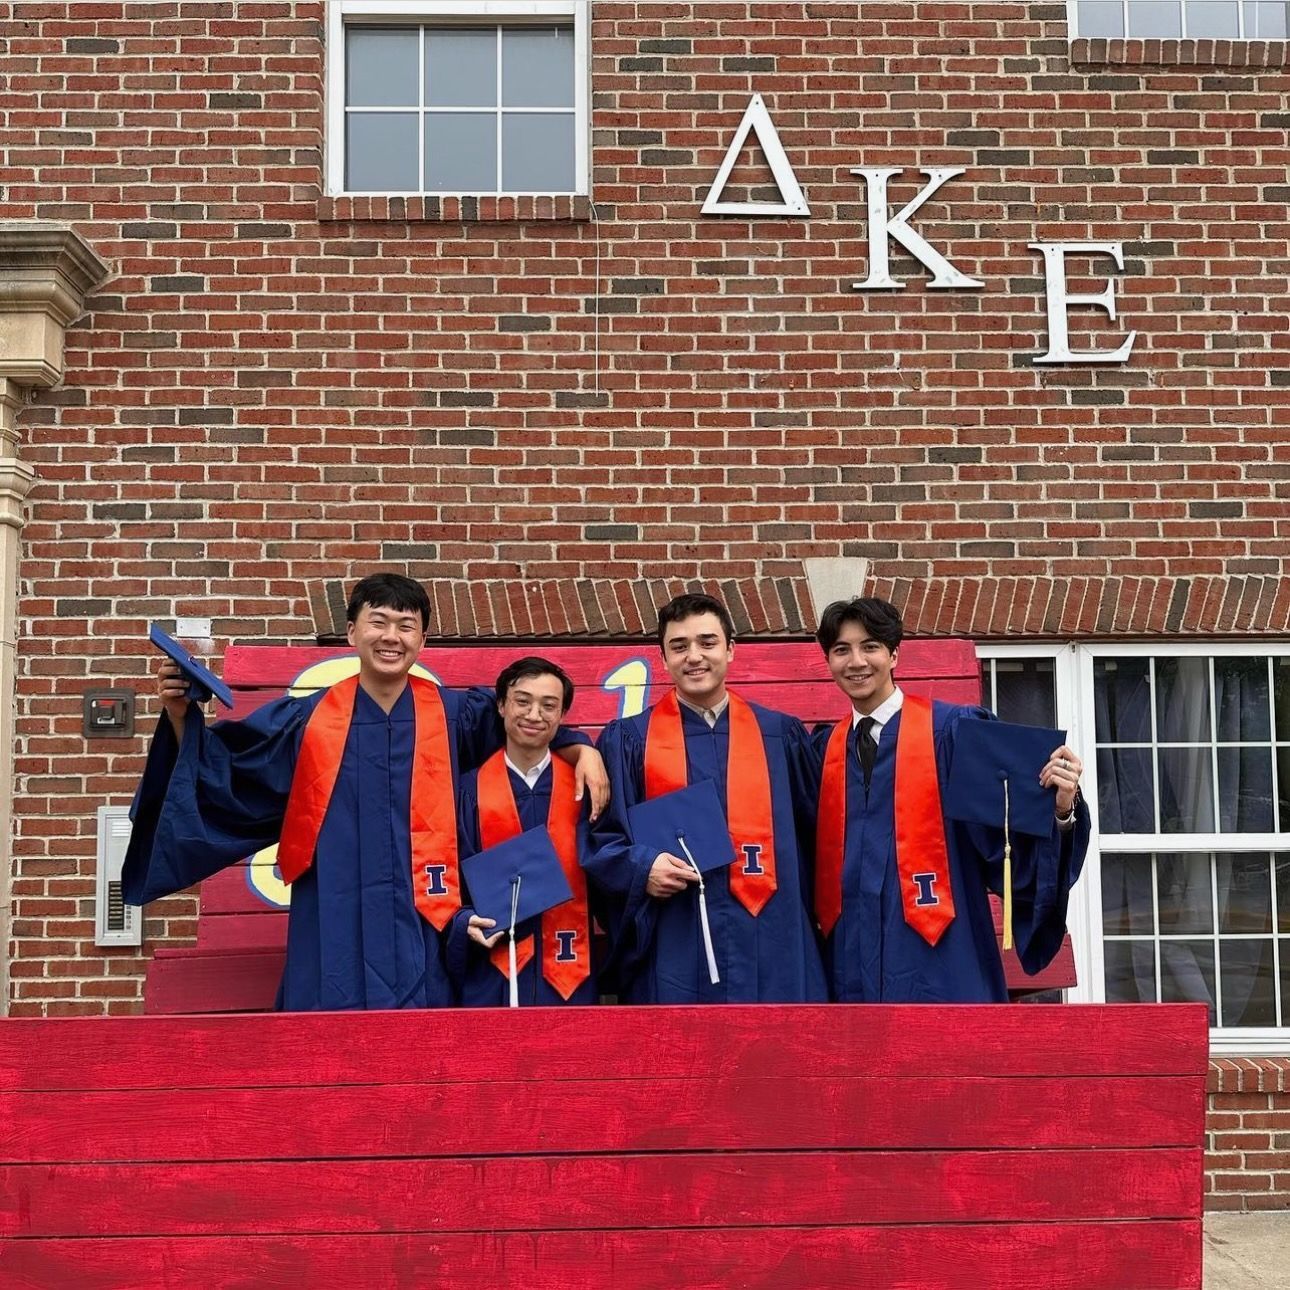 Three DKE Graduates standing in front of their fraternity house